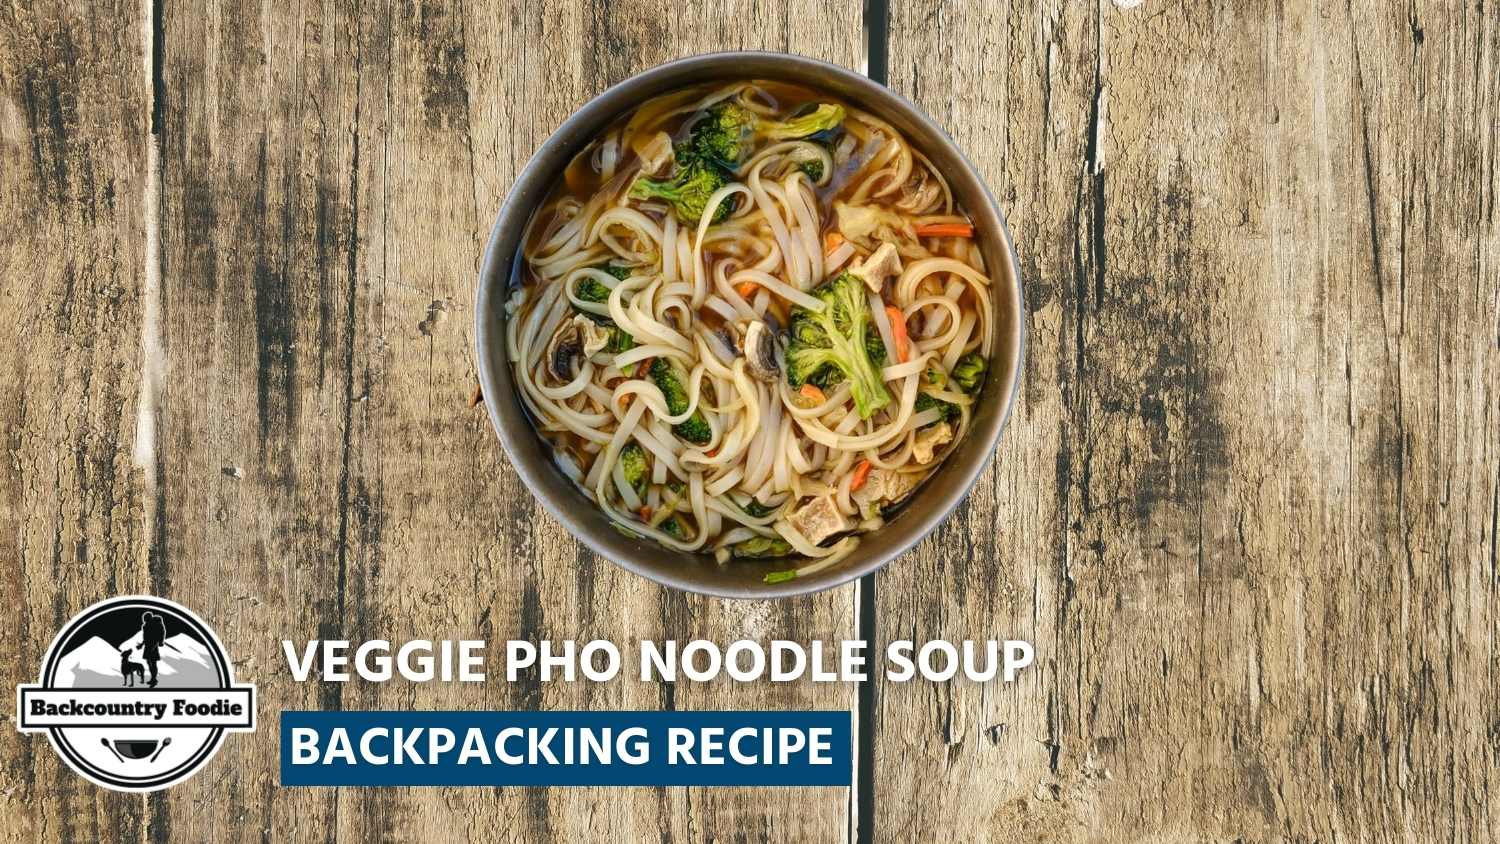 Have you ever looked back over several days of hiking and wondered if you’ve eaten a single vegetable? Bringing a few servings of this veggie pho noodle soup will solve that problem. Get all your veggies for the day in one cozy little package. We even eat this soup for dinner at home on a regular occasion. You can also enjoy 200+ more recipes like this one at backcountryfoodie.com. #veggiephonoodlesoup #diybackpackingmeals #bestdeydratormeals #dehydratorrecipes #backpackingrecipes #freezerbagcooking